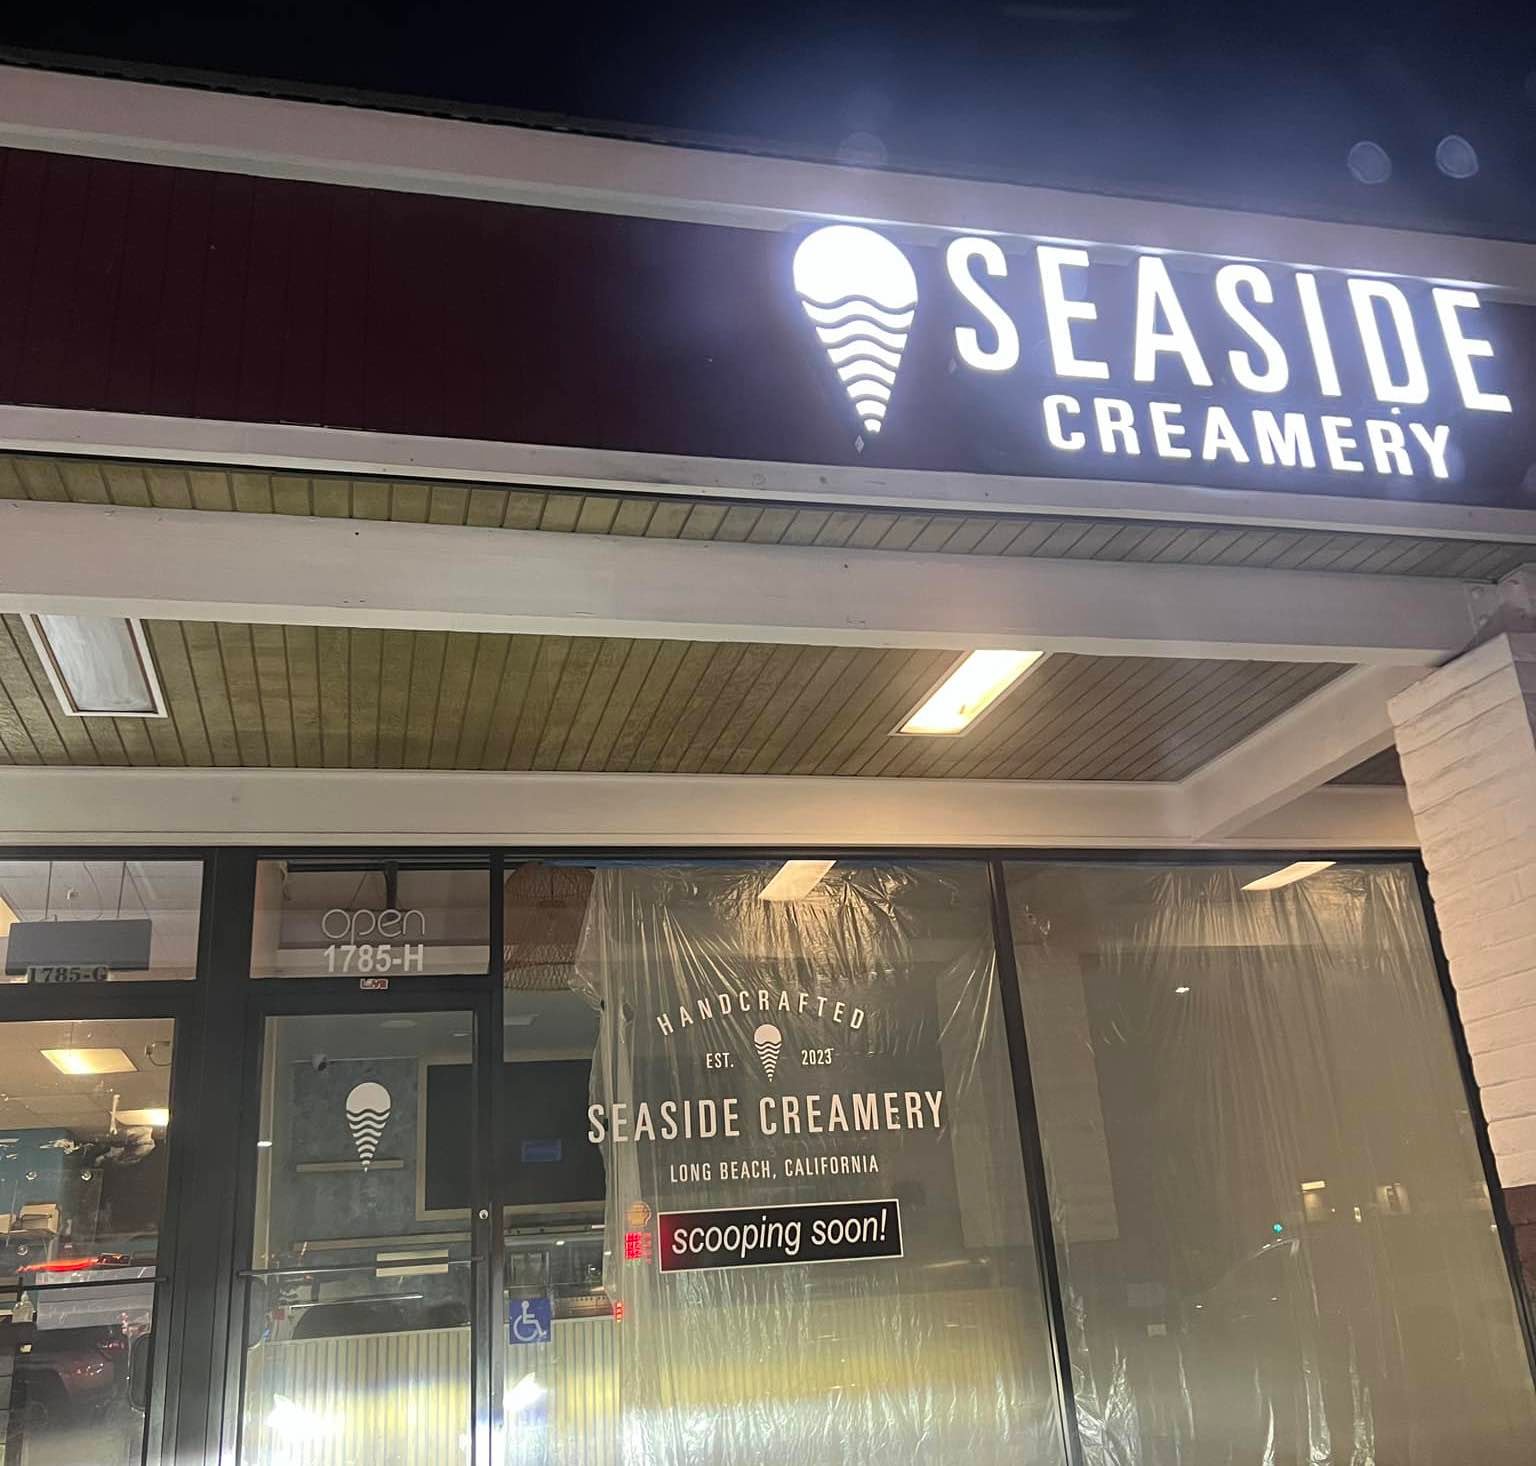 Signage for Seaside Creamery has gone up by CSULB. Photo by Demitri Wimalaratne/LBFS.